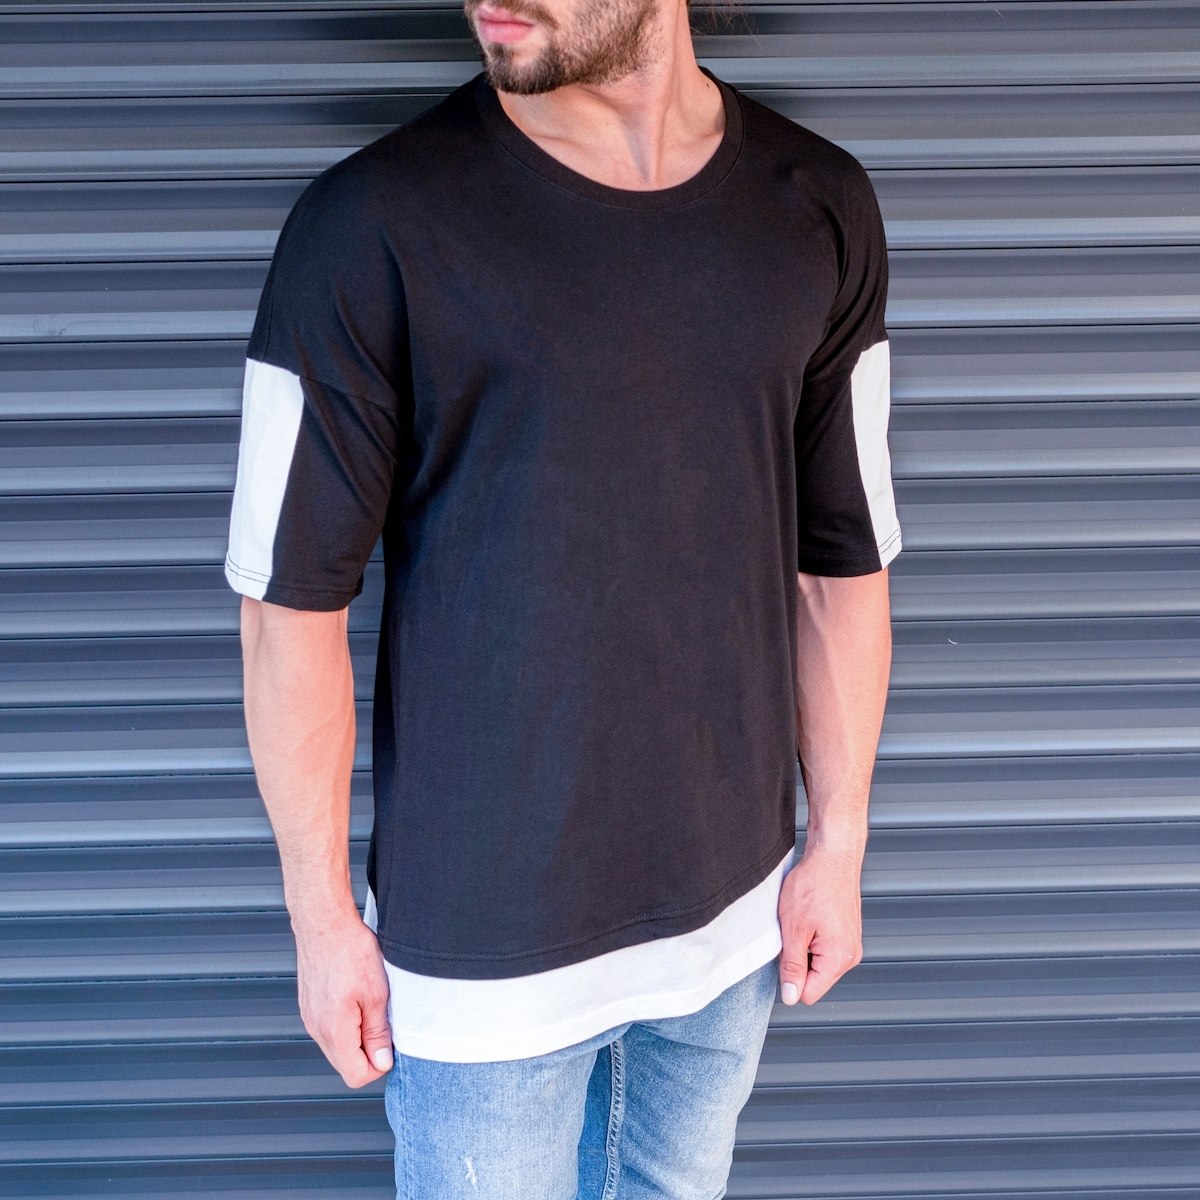 Men's Oversized T-Shirt With Stripes